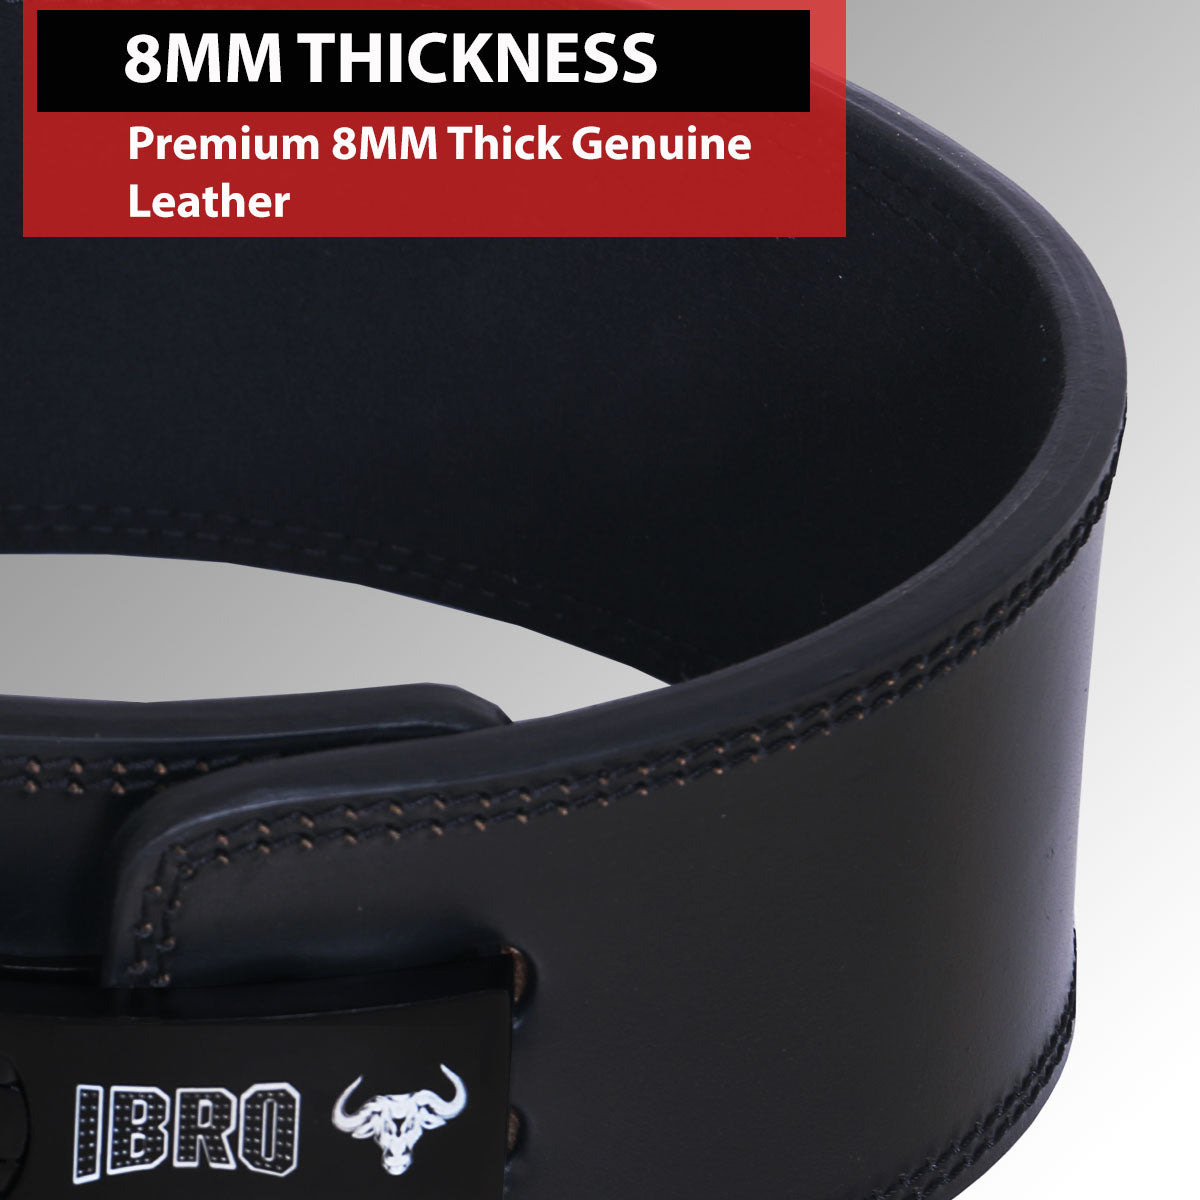 IBRO Powerlifting Weight Lifting Lever Gym Belt – 8MM Extreme Power Heavy Duty 100% Genuine Leather- Squat Deadlift Bodybuilding WeightLifting IPF Strongman for Men Women 8mm AllBlack